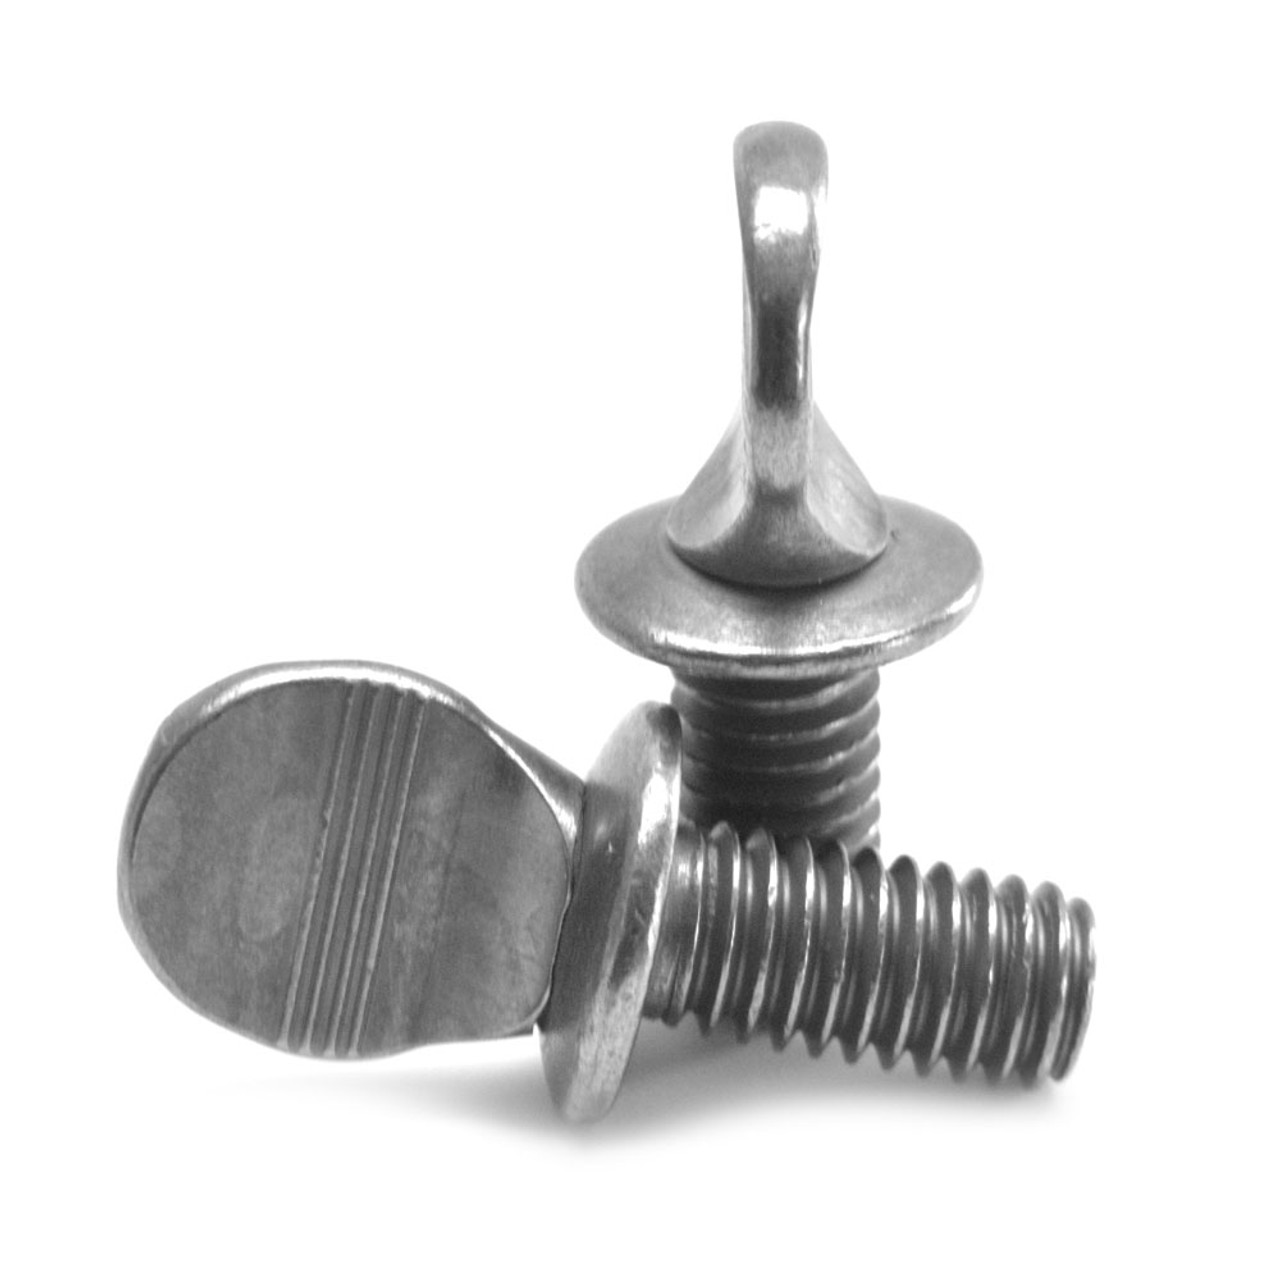 3/8-16 x 2 Coarse Thread Thumb Screw Type A With Shoulder Low Carbon Steel Plain Finish